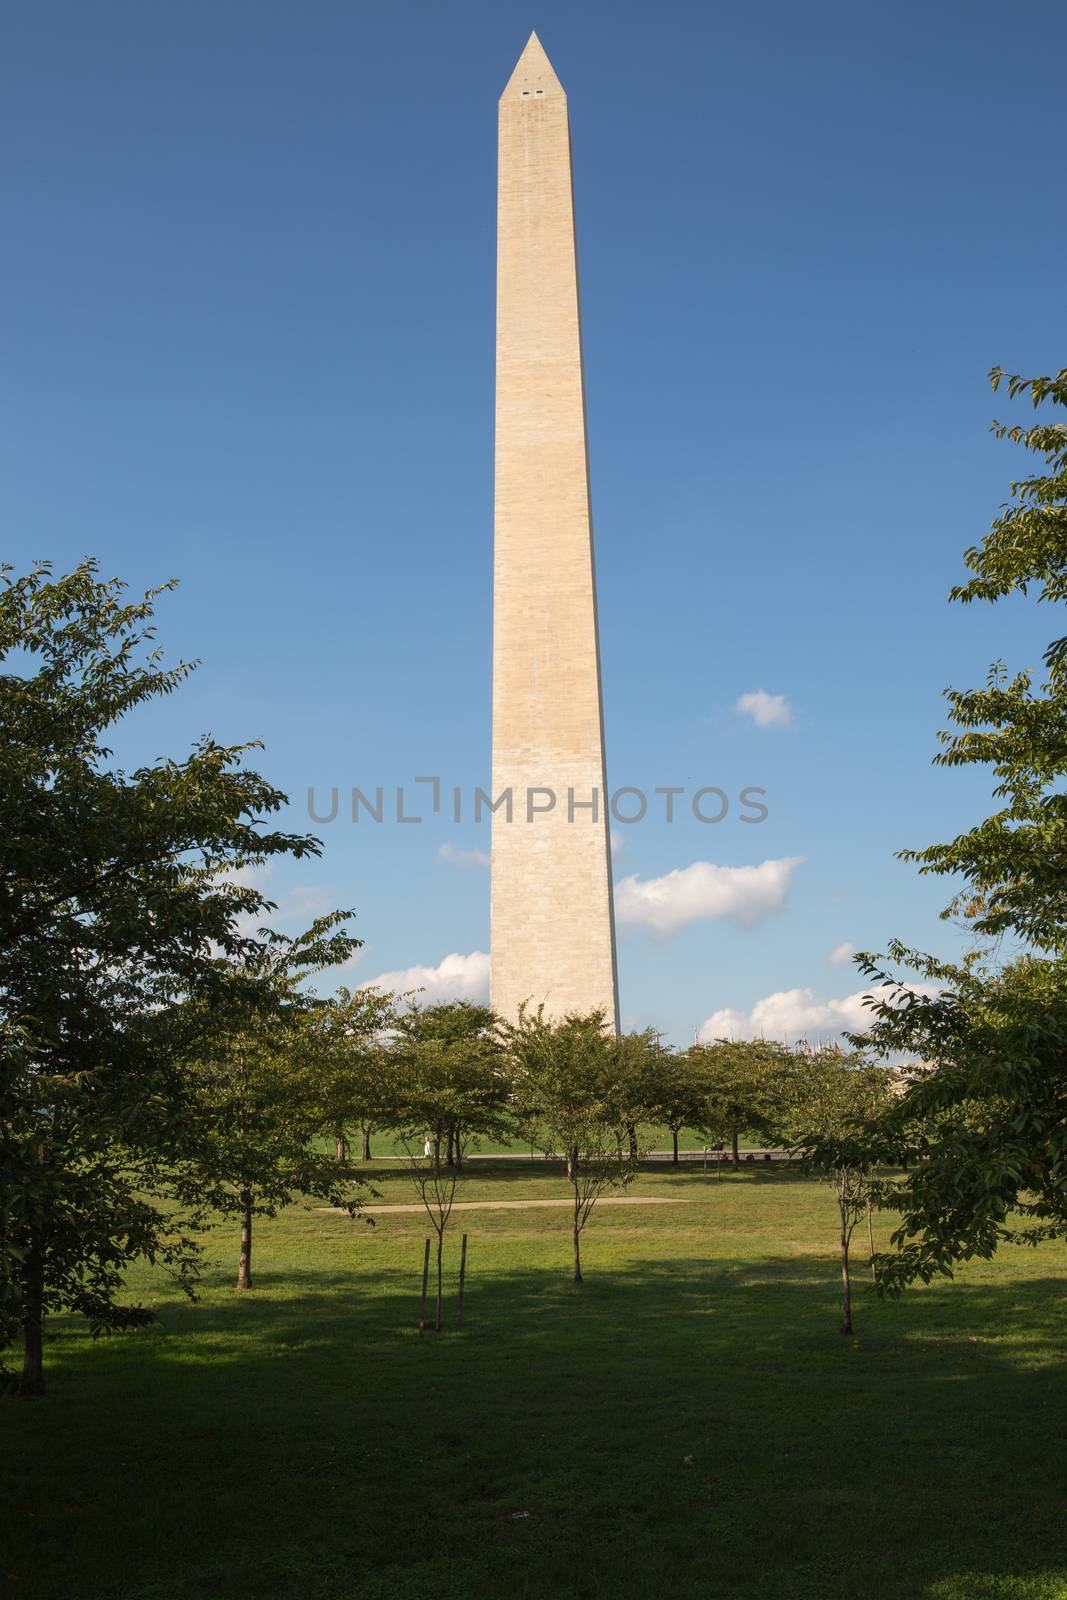 The Washington Monument on the Mall by chrisukphoto